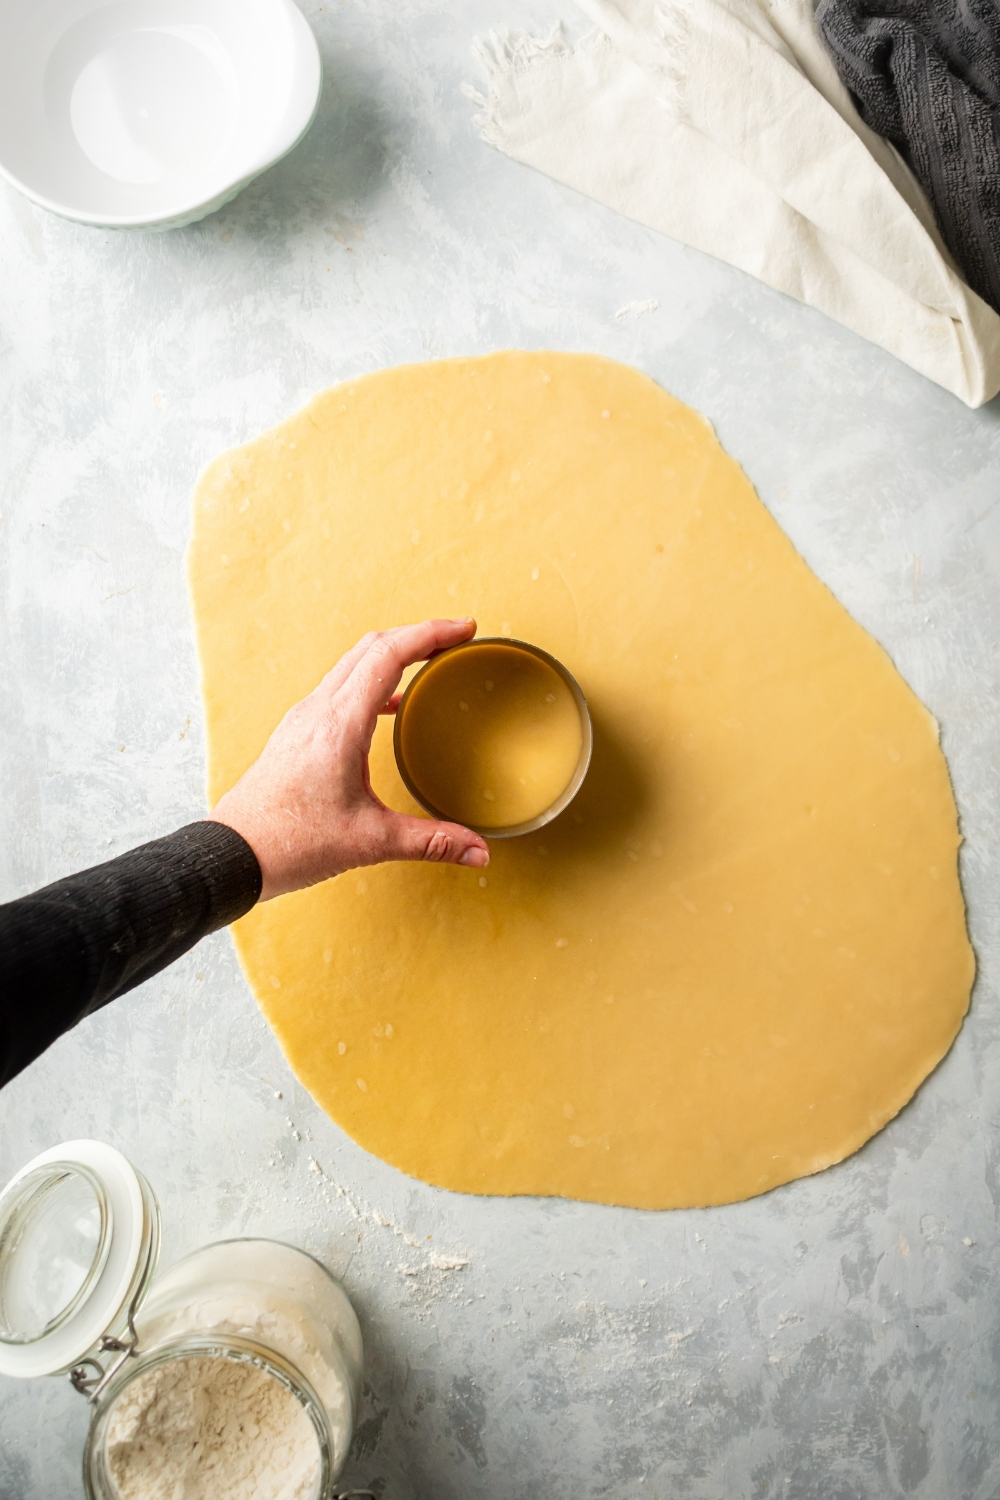 A thin piece of empanada dough flat on a gray counter. There is a hand holding a round cutter on top of the middle of the sheet of dough.